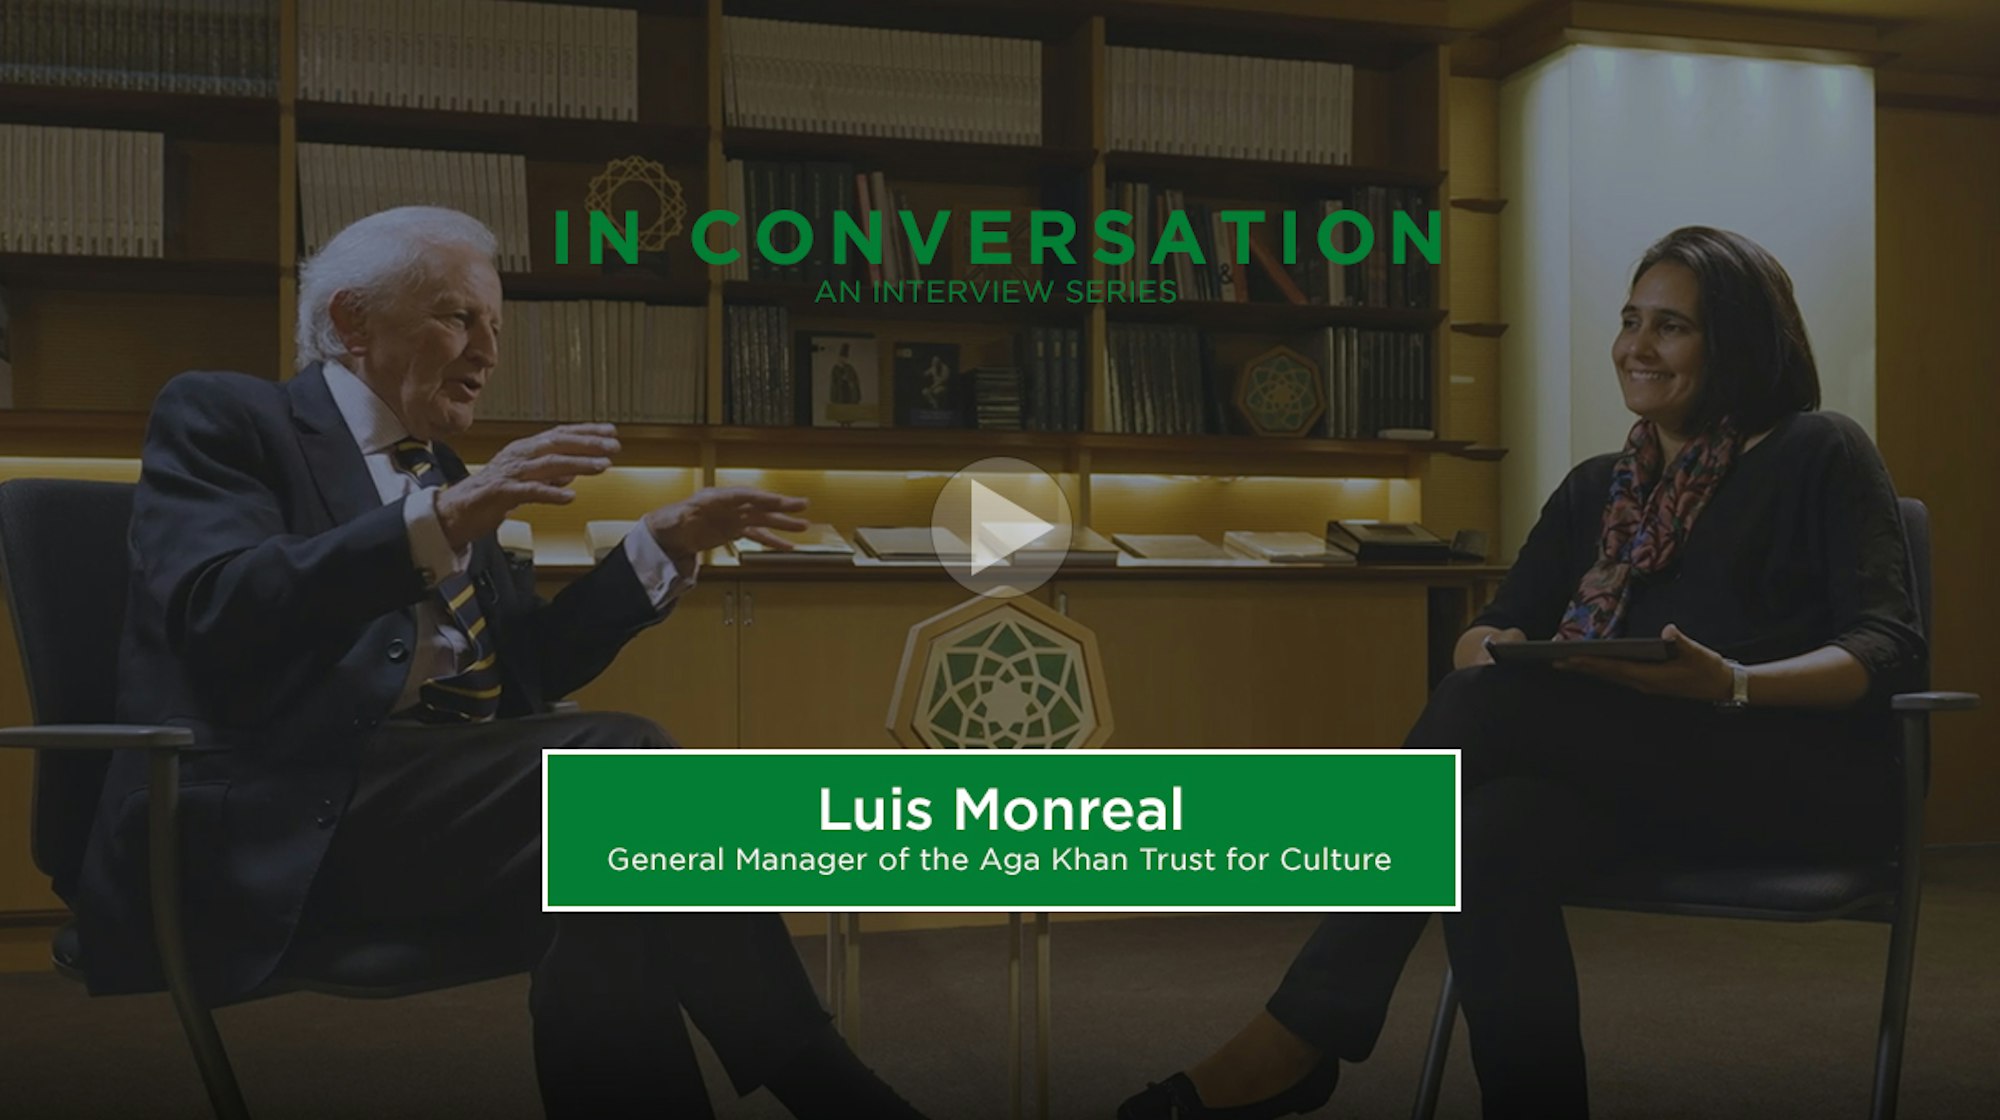 In conversation with Luis Monreal